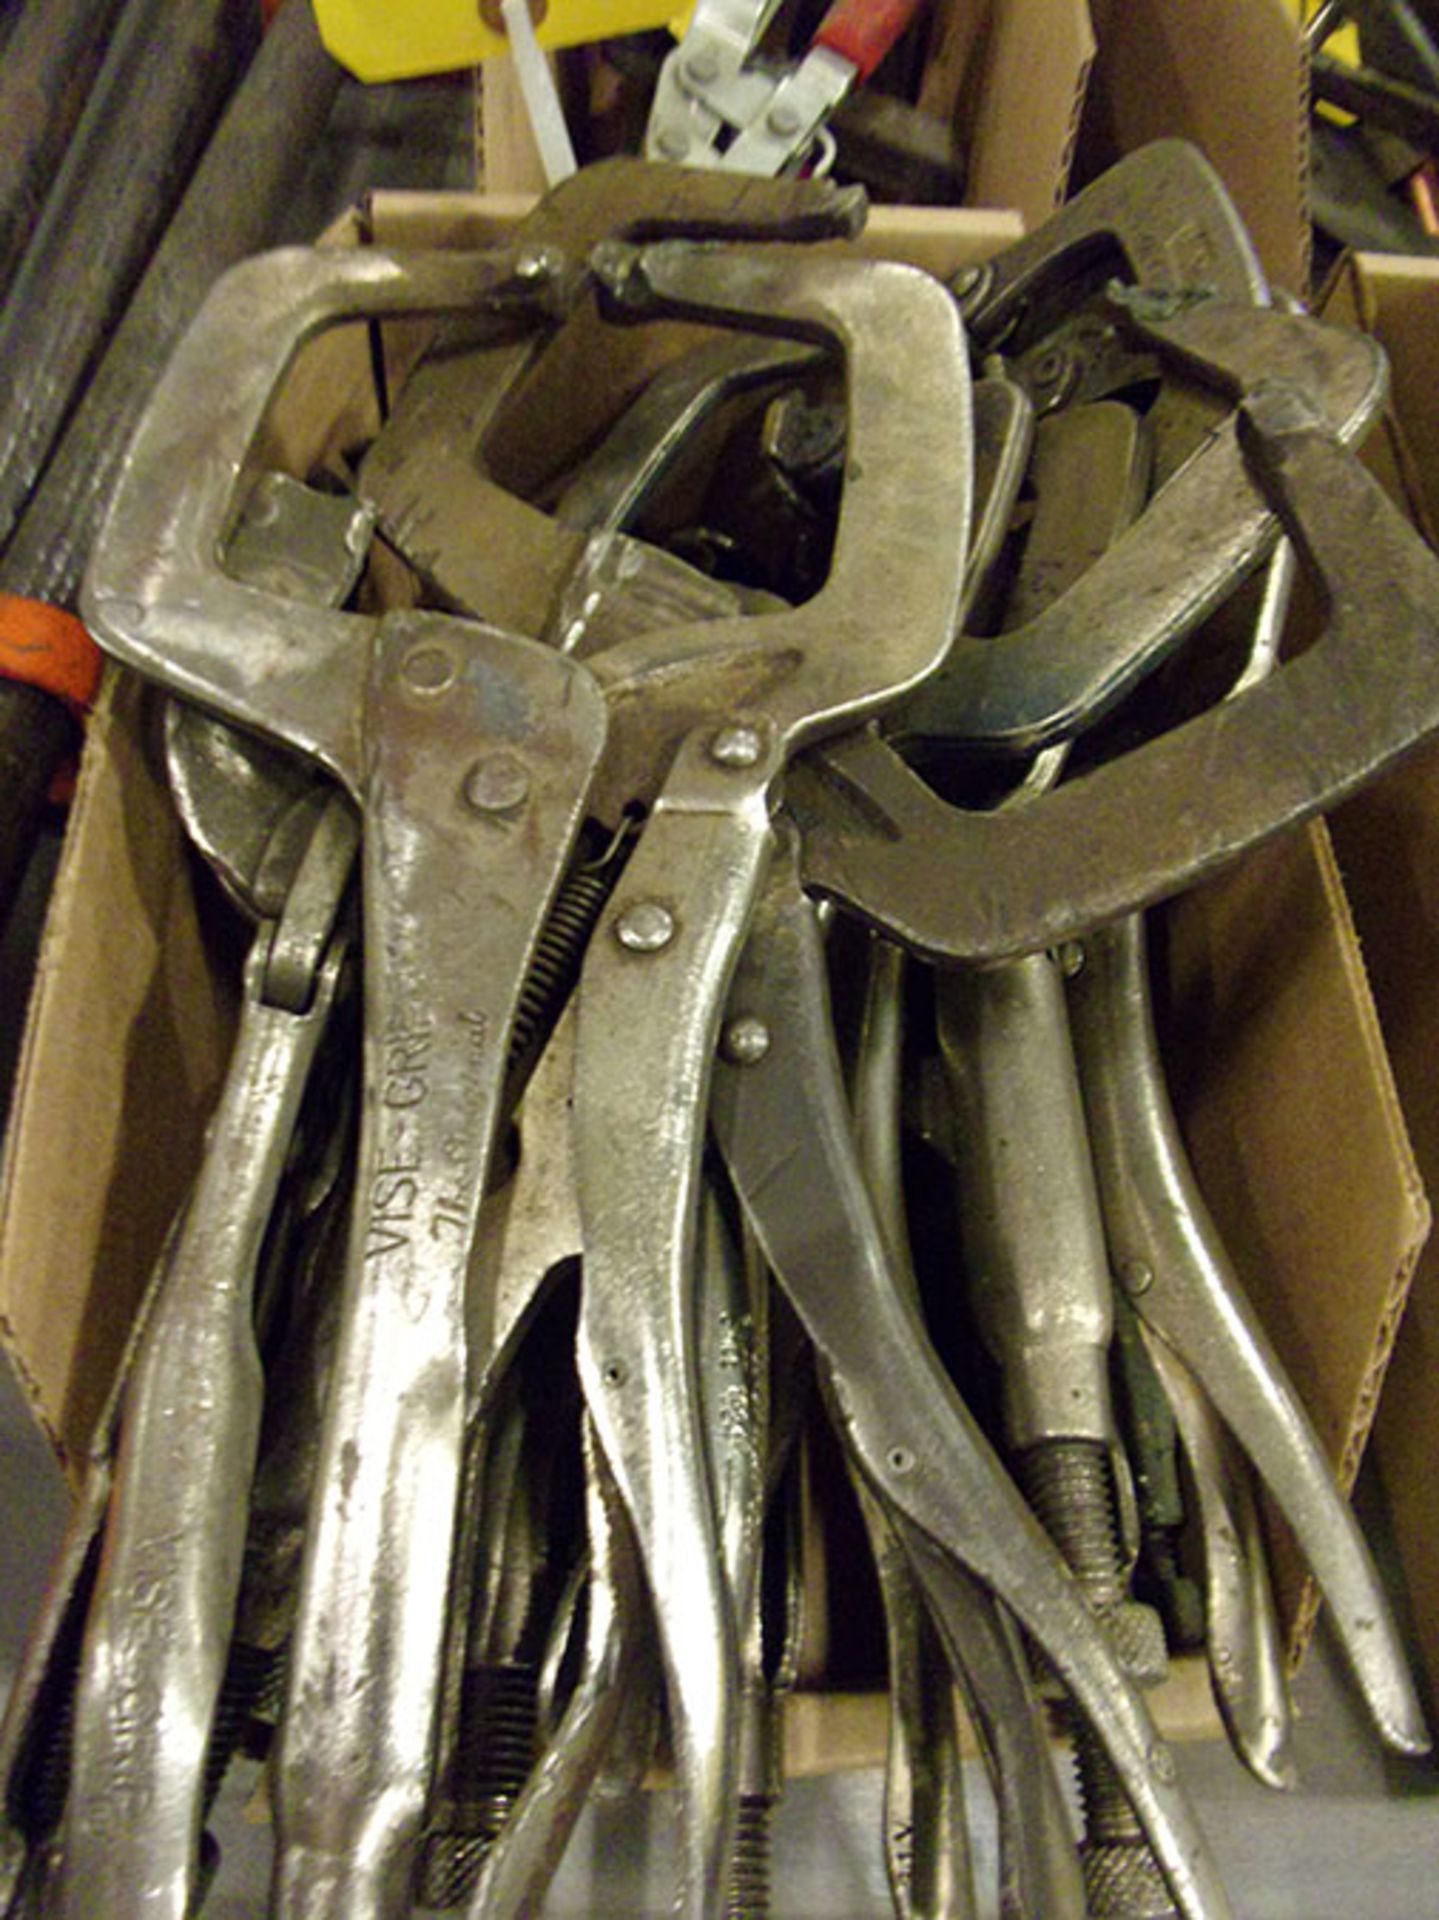 LOT OF VISE GRIP CLAMPS